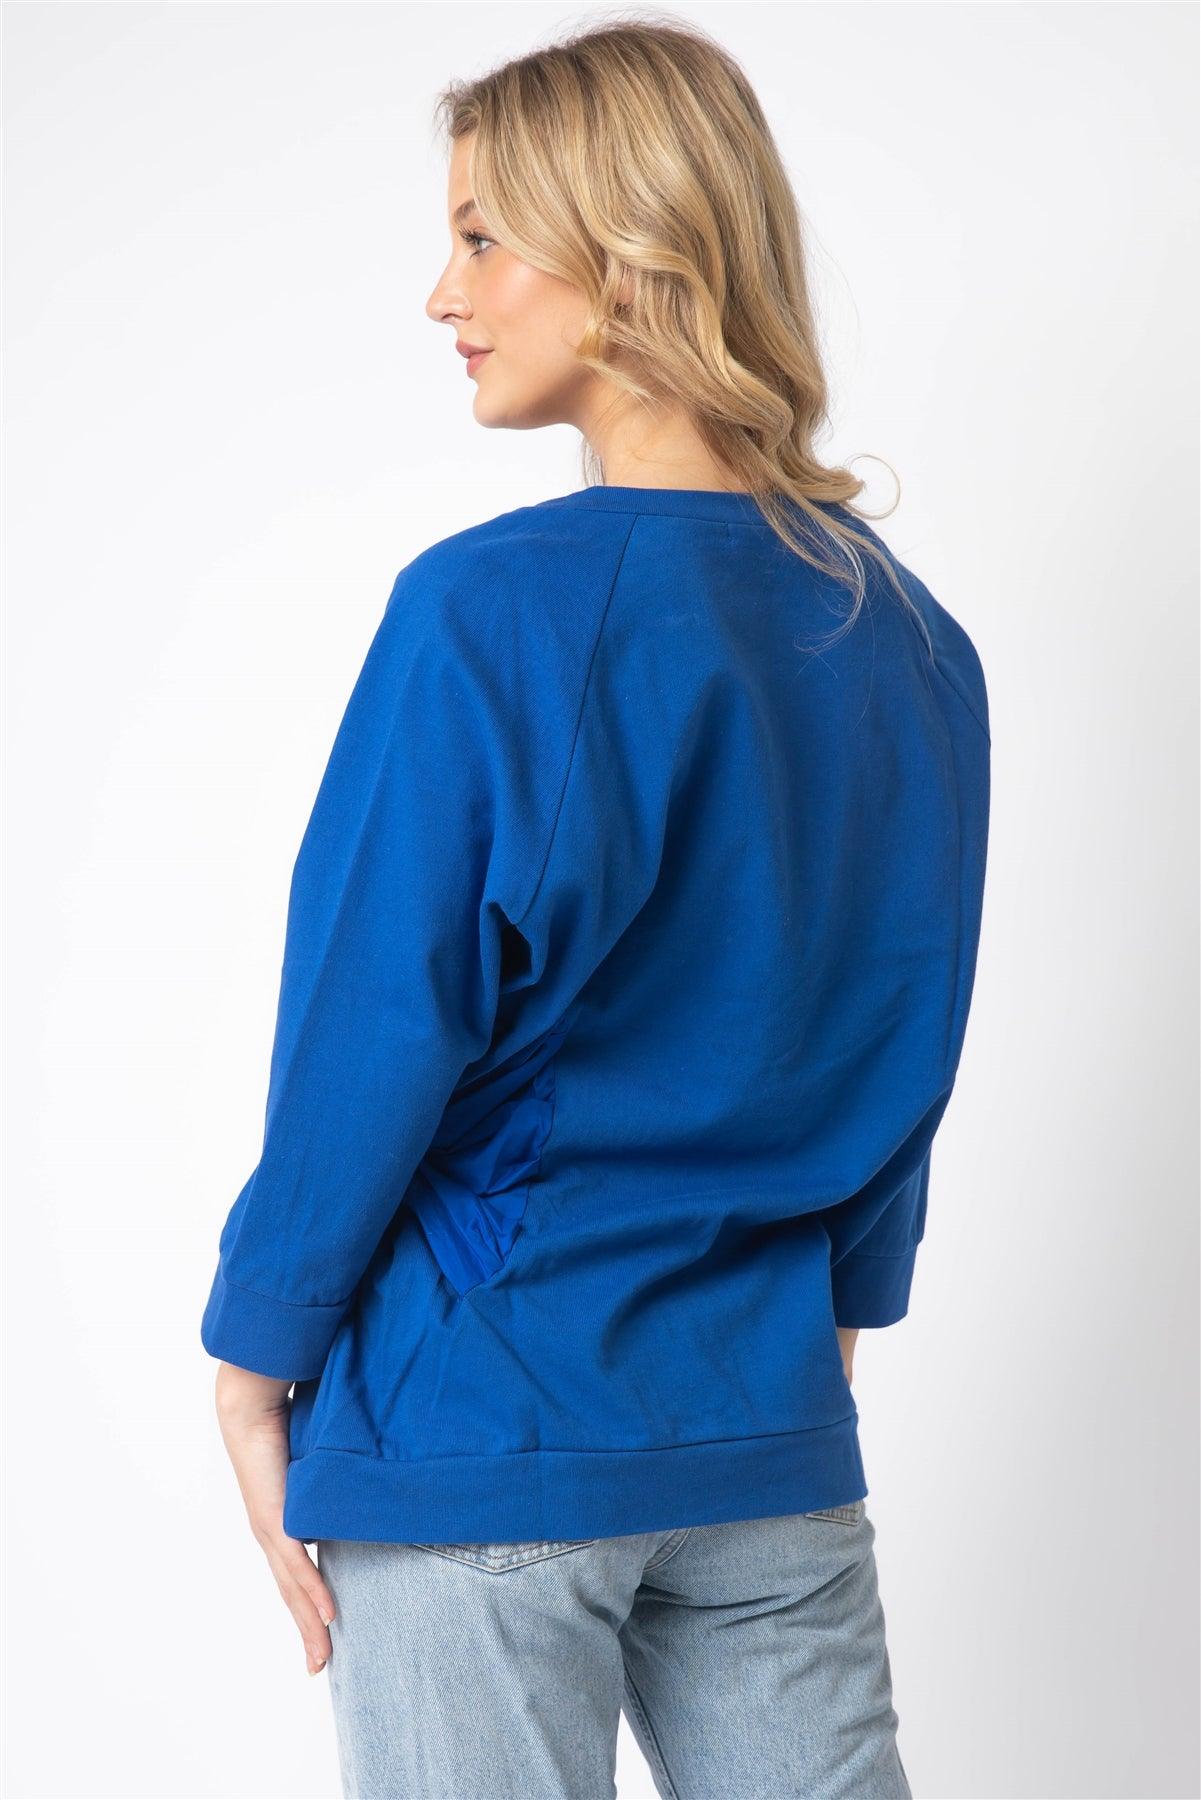 Royal Blue Cotton Side Bow Detail Long Sleeve Top /1-1-1